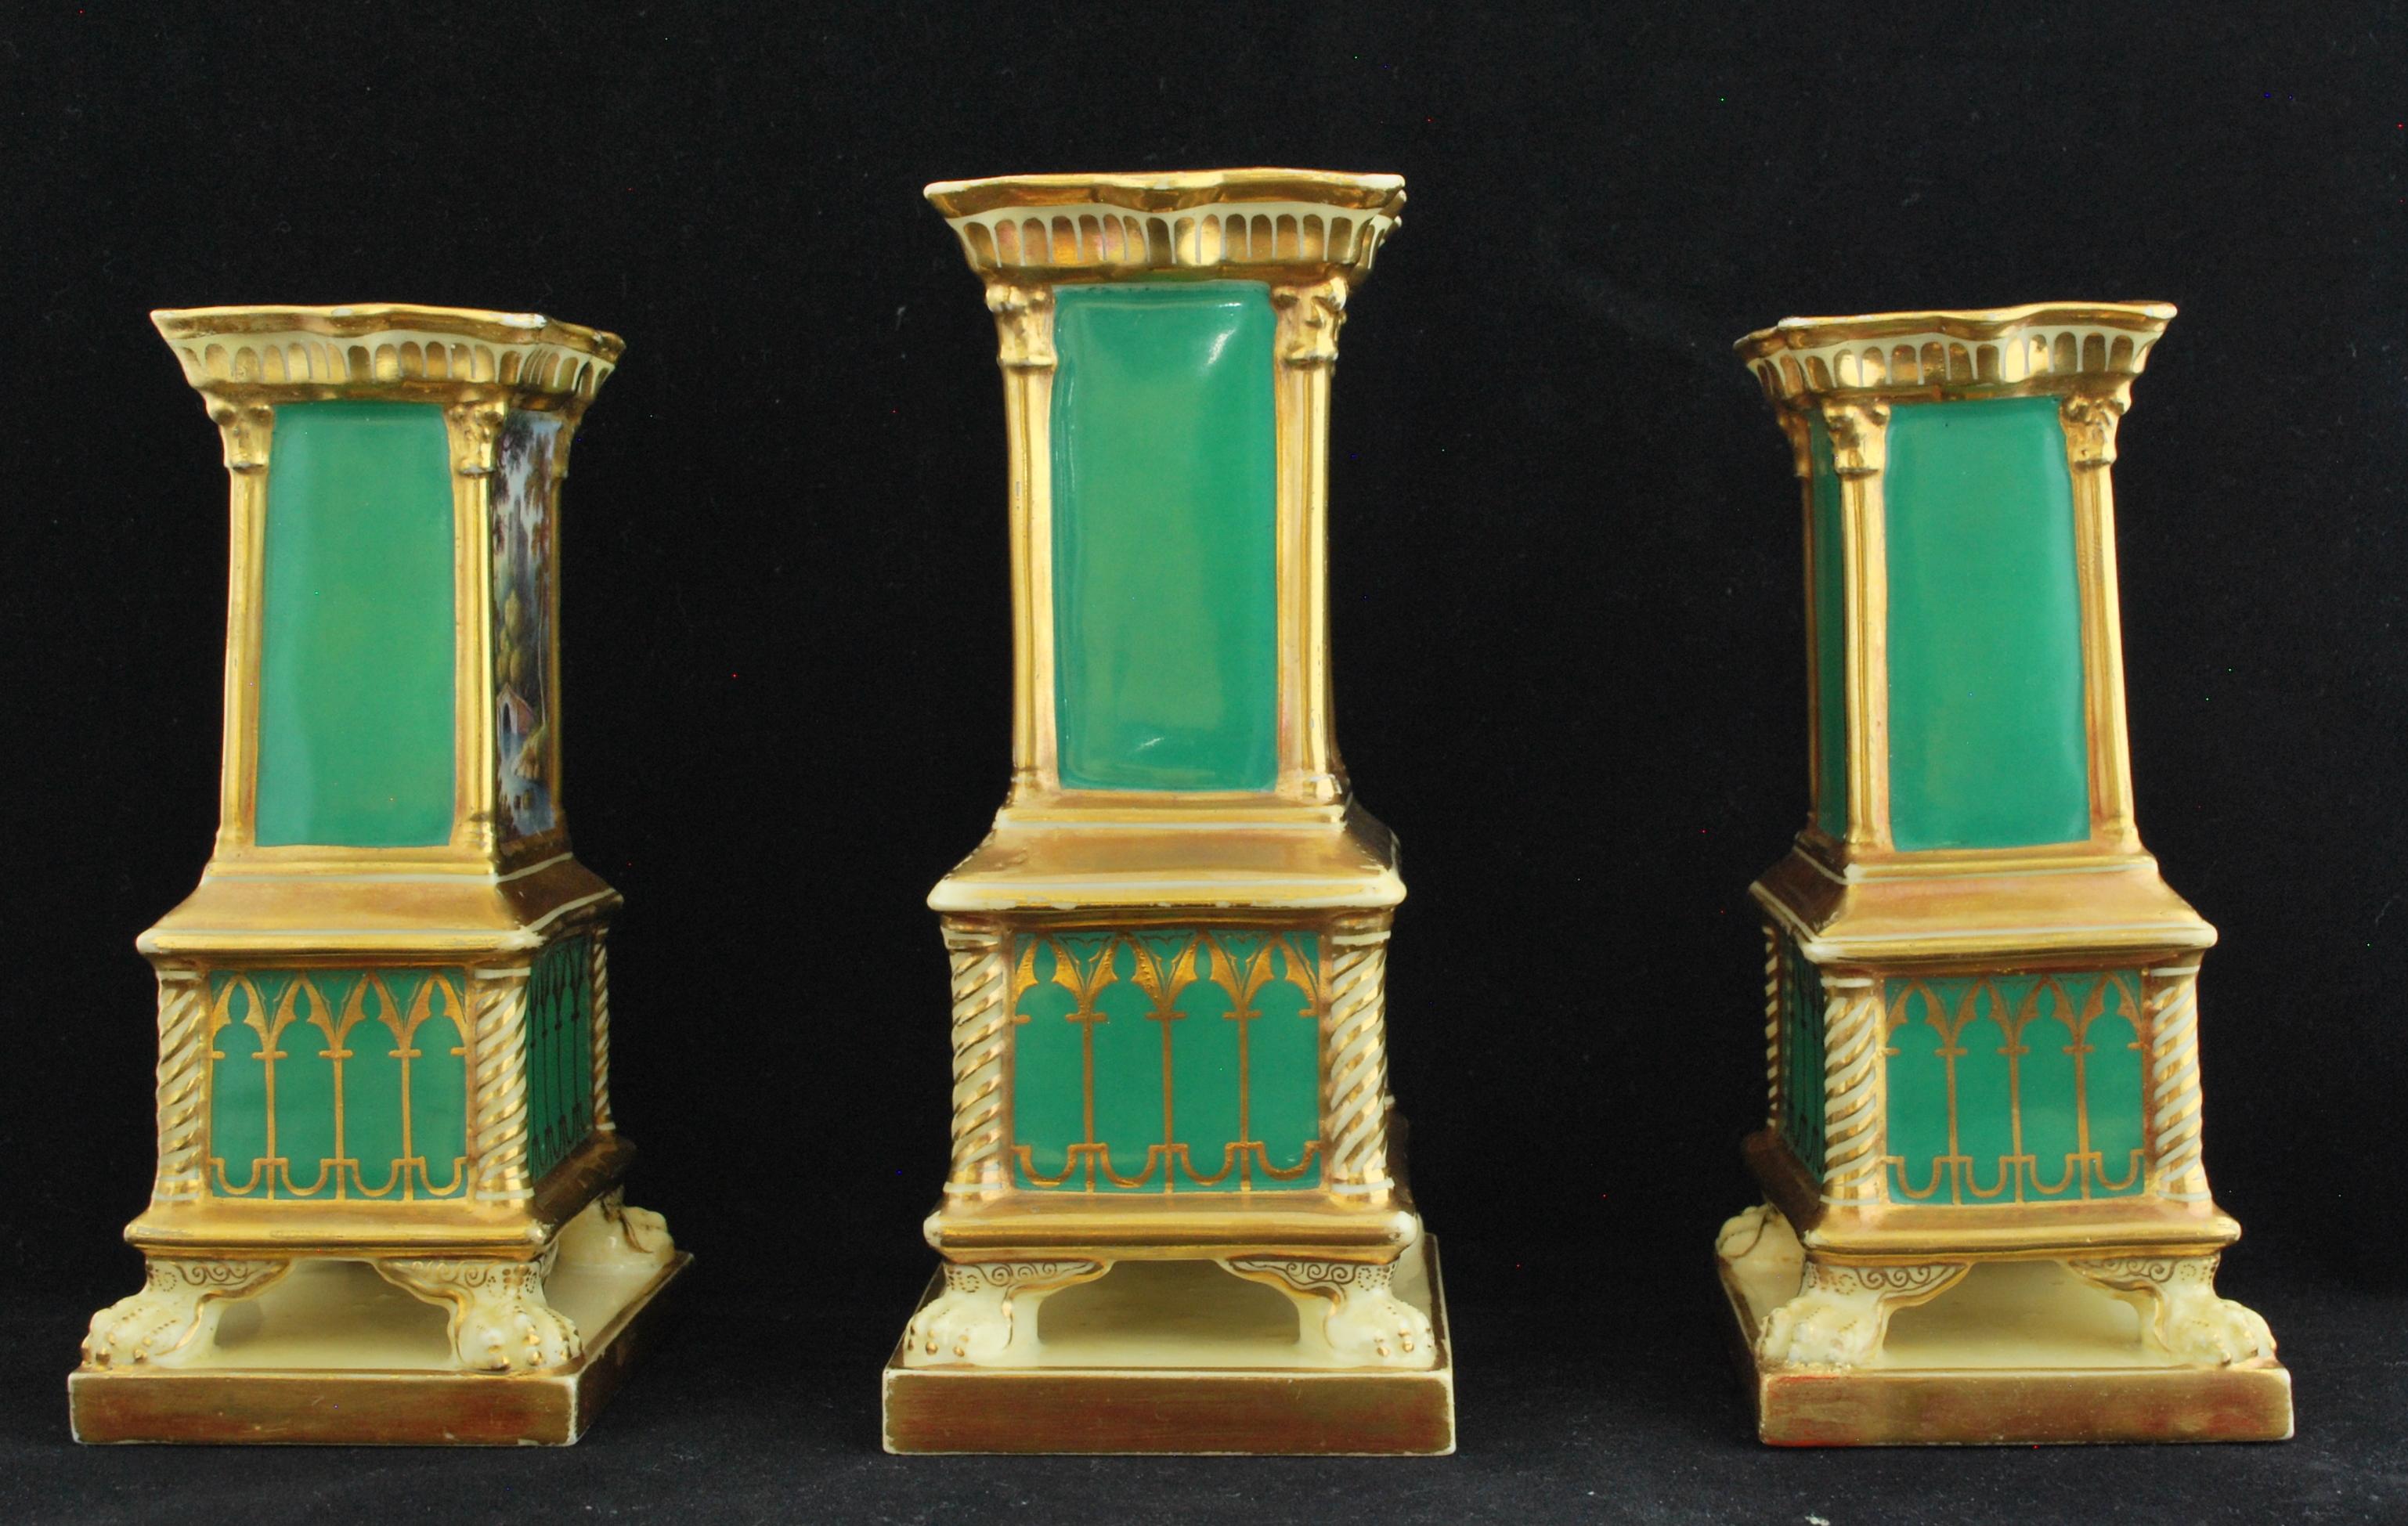 Set of three spill vases, or Match Pots, decorated in the Gothic Revival manner, with reserves showing finely detailed landscapes. The painting by Lark Pratt, who was working for Minton at the time.